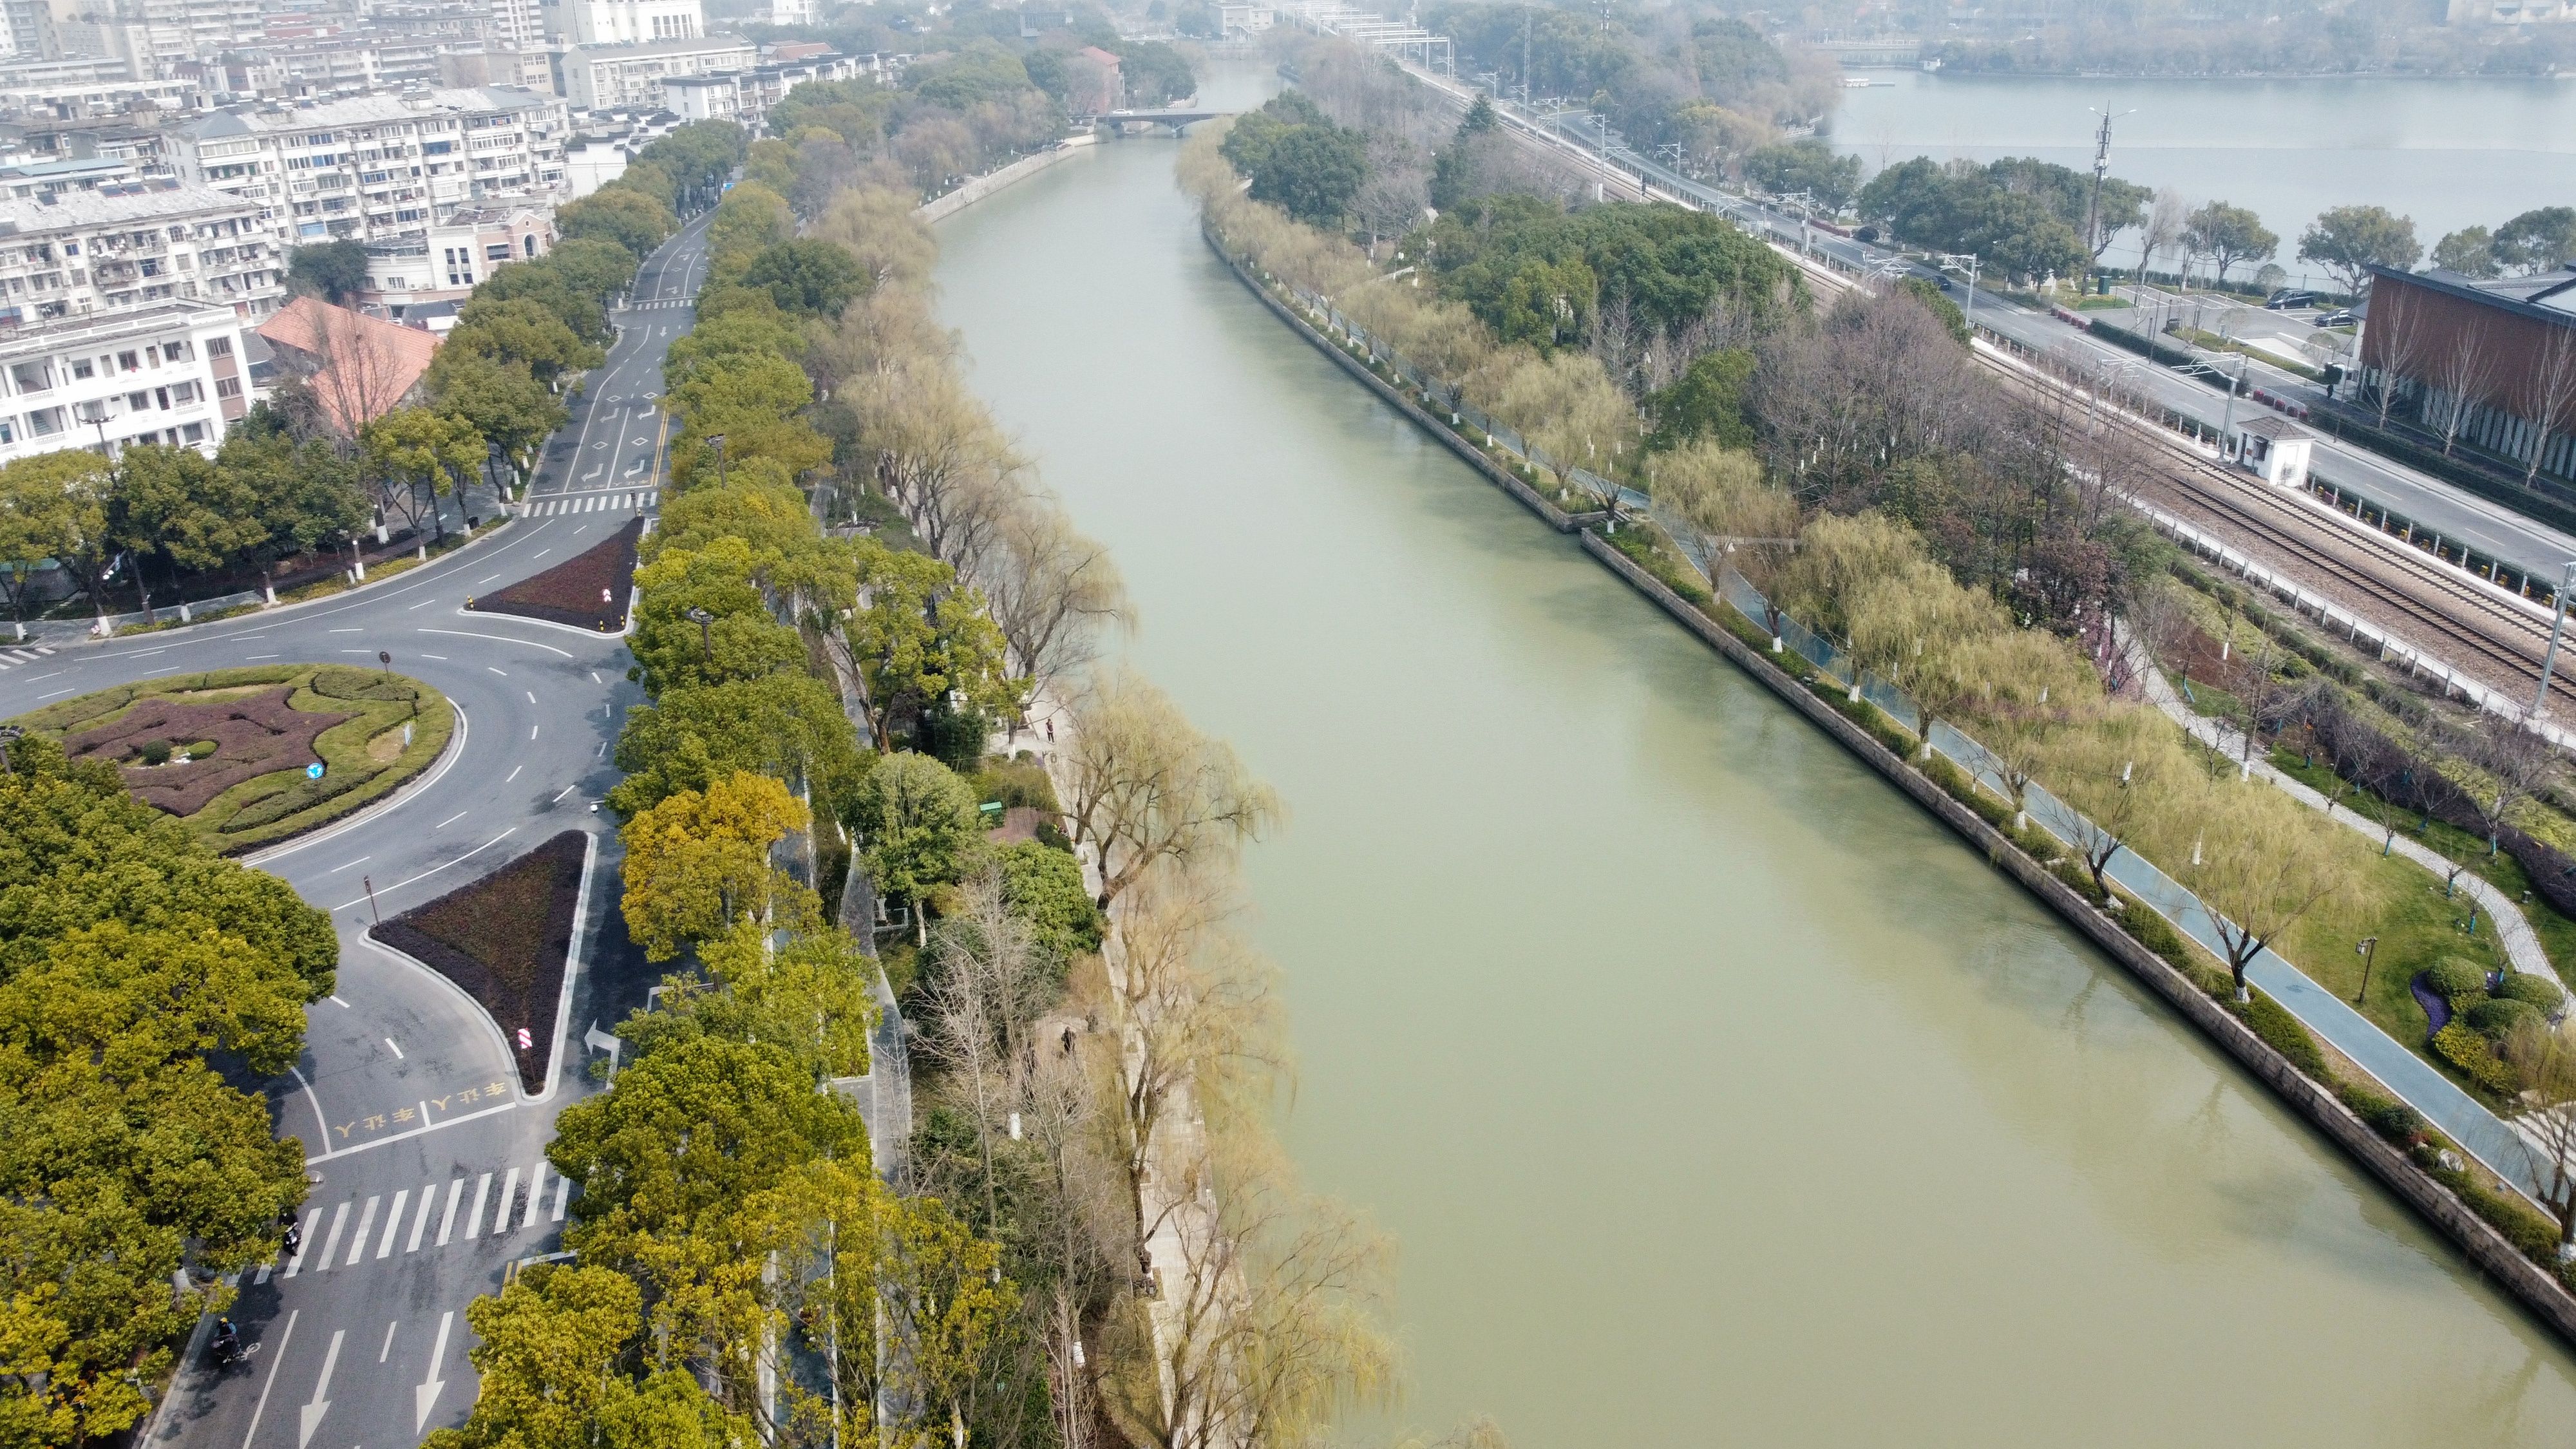 Jiaxing Ancient City Connecting South Lake International Concept Design Competition on Footbridge Crossing Huancheng River and Railway. Aerial photo